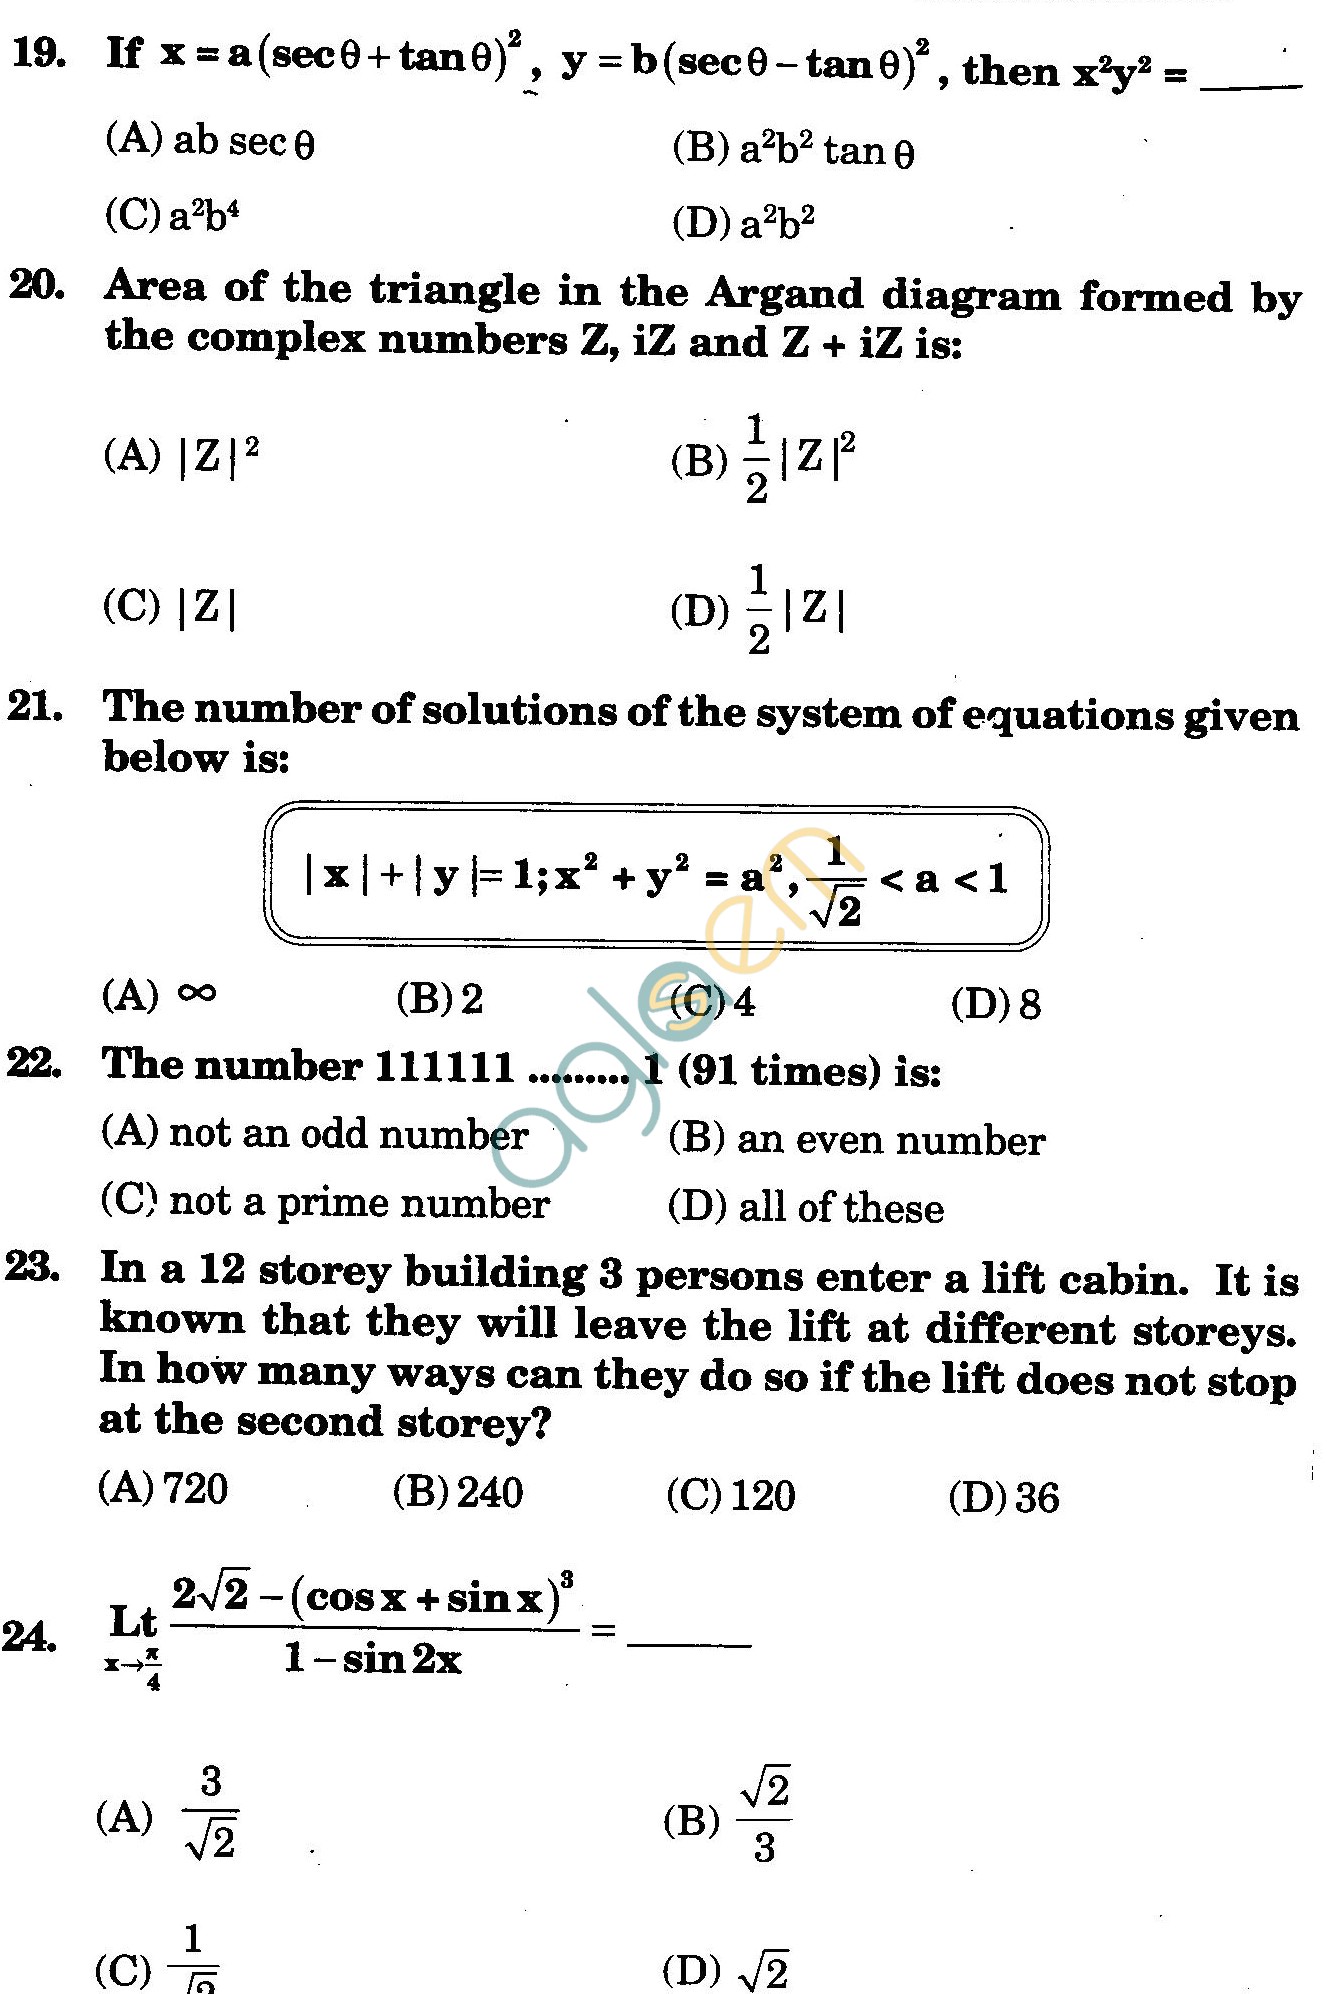 NSTSE 2009 Class XI PCM Question Paper with Answers - Mathematics